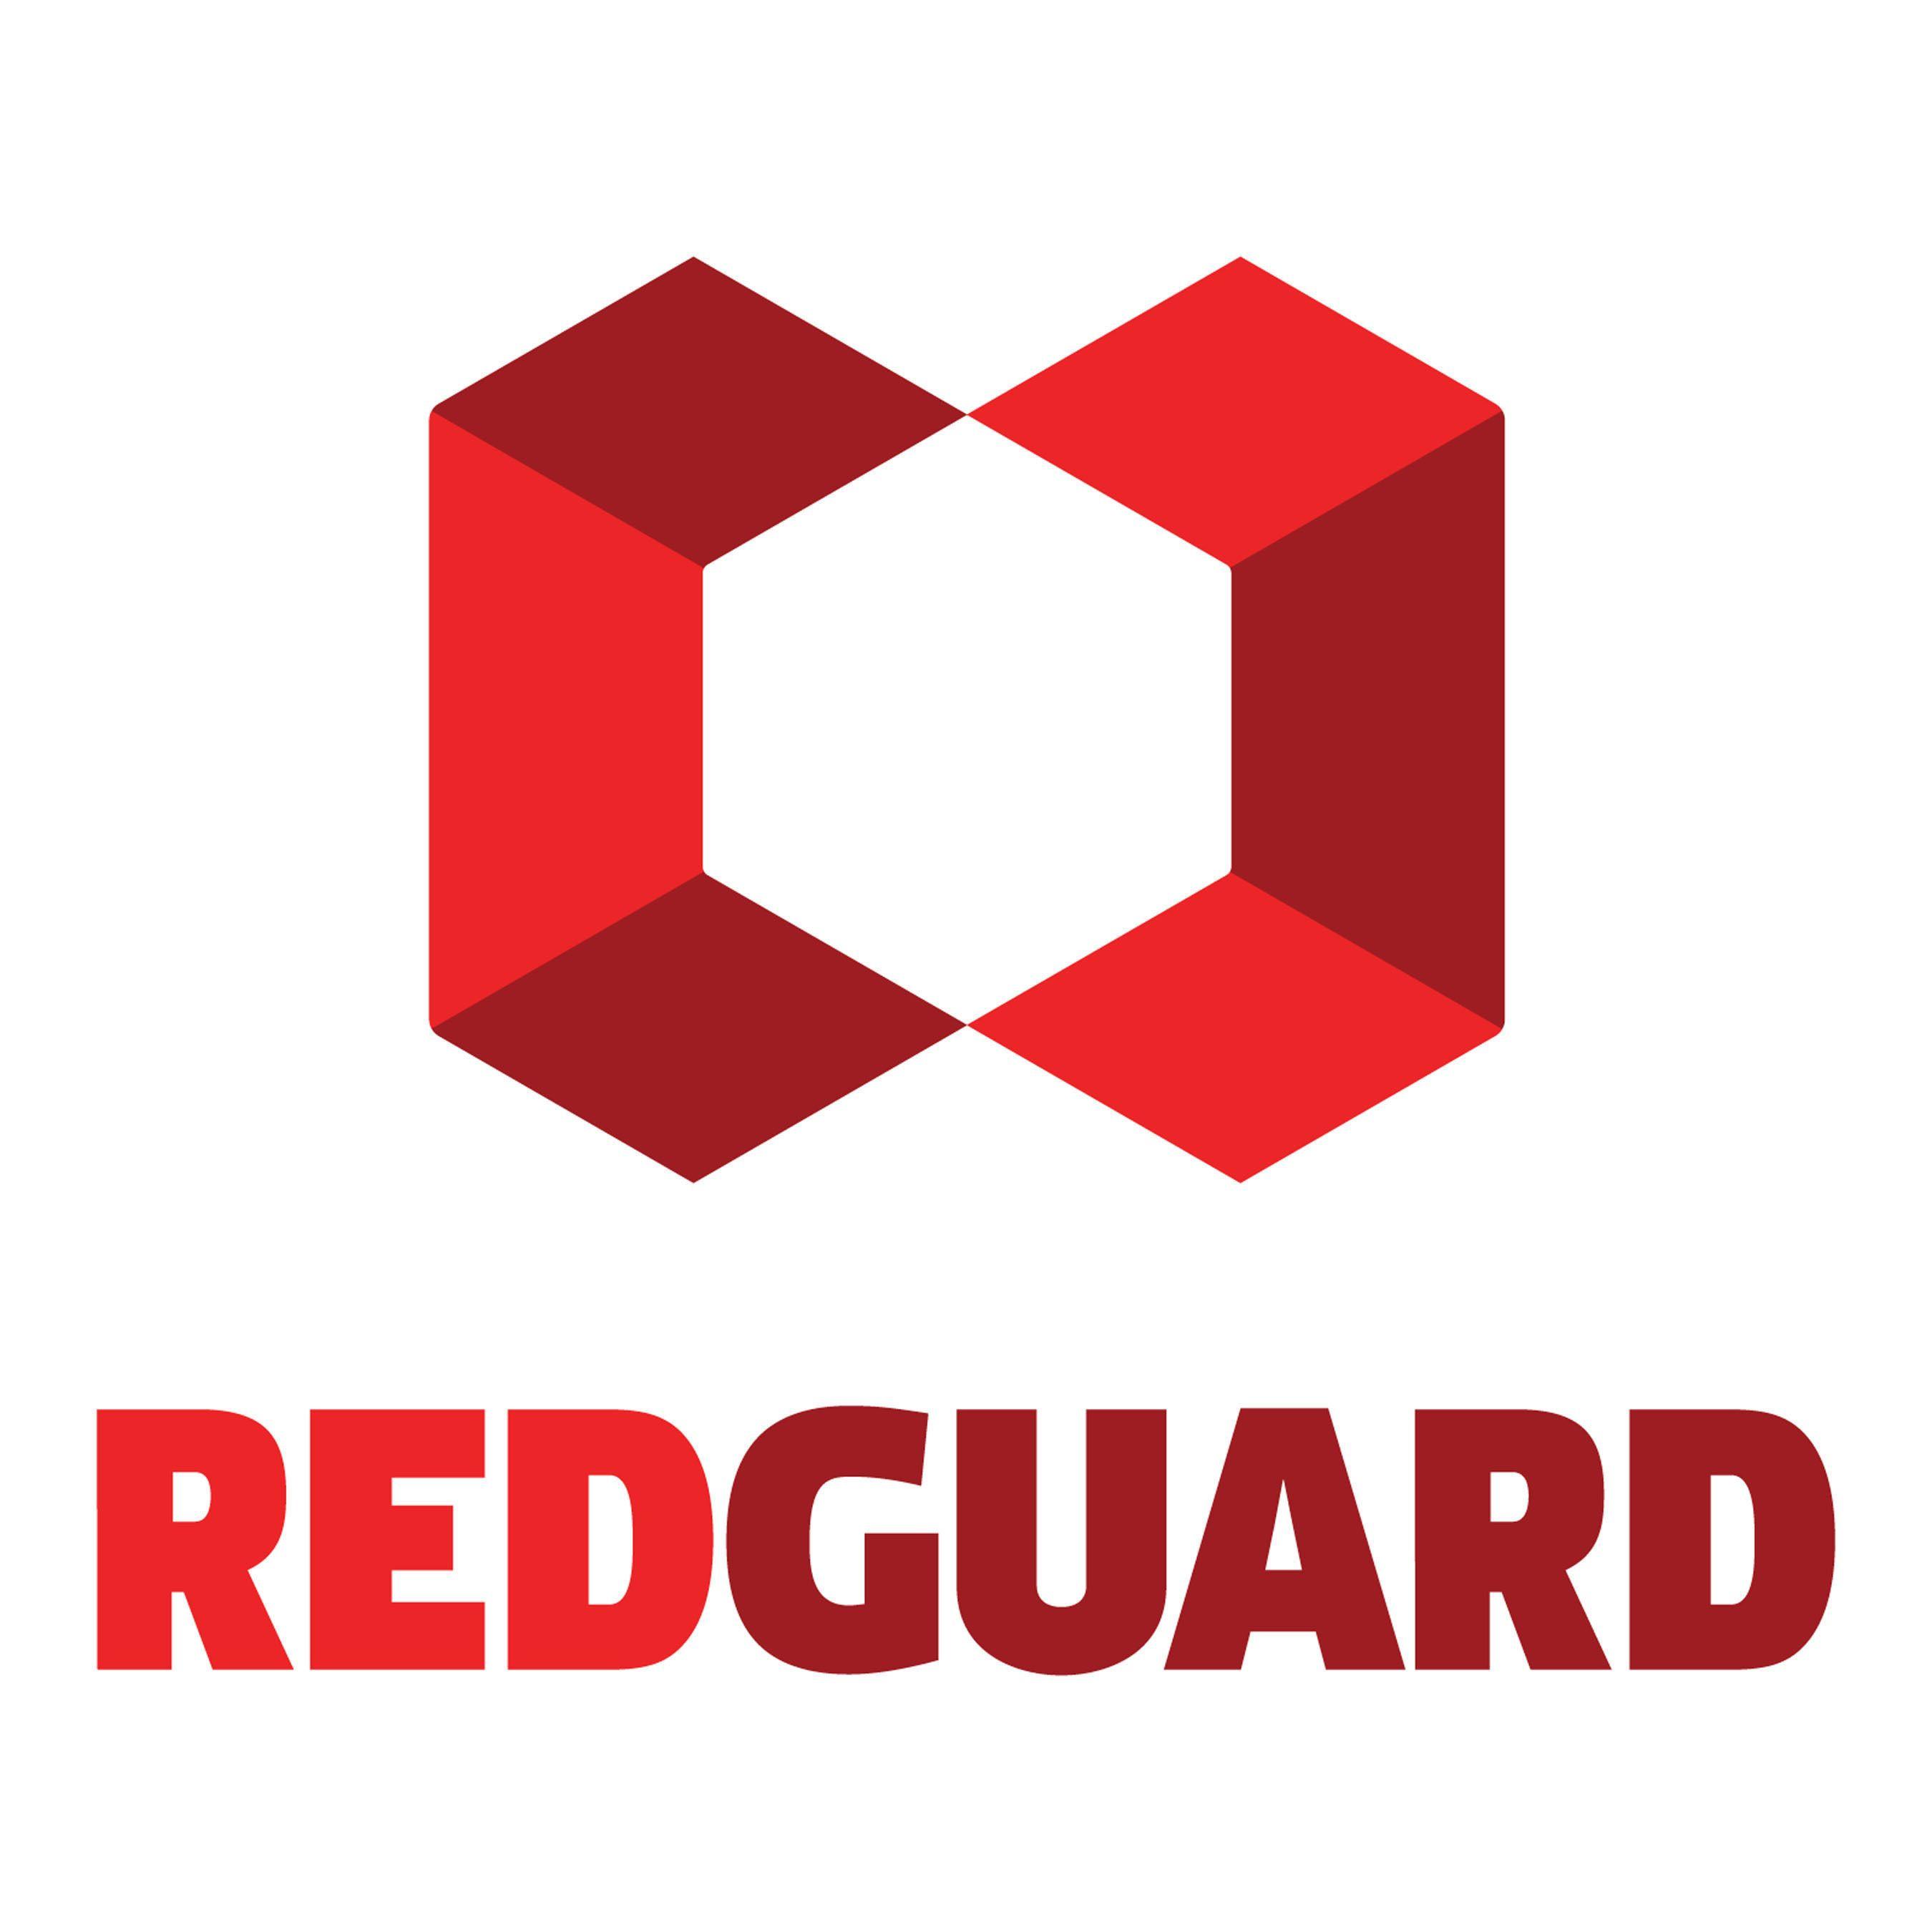 Red Guard Logo - CoverSix Shelters, A Division Of RedGuard, Builds On State Of The